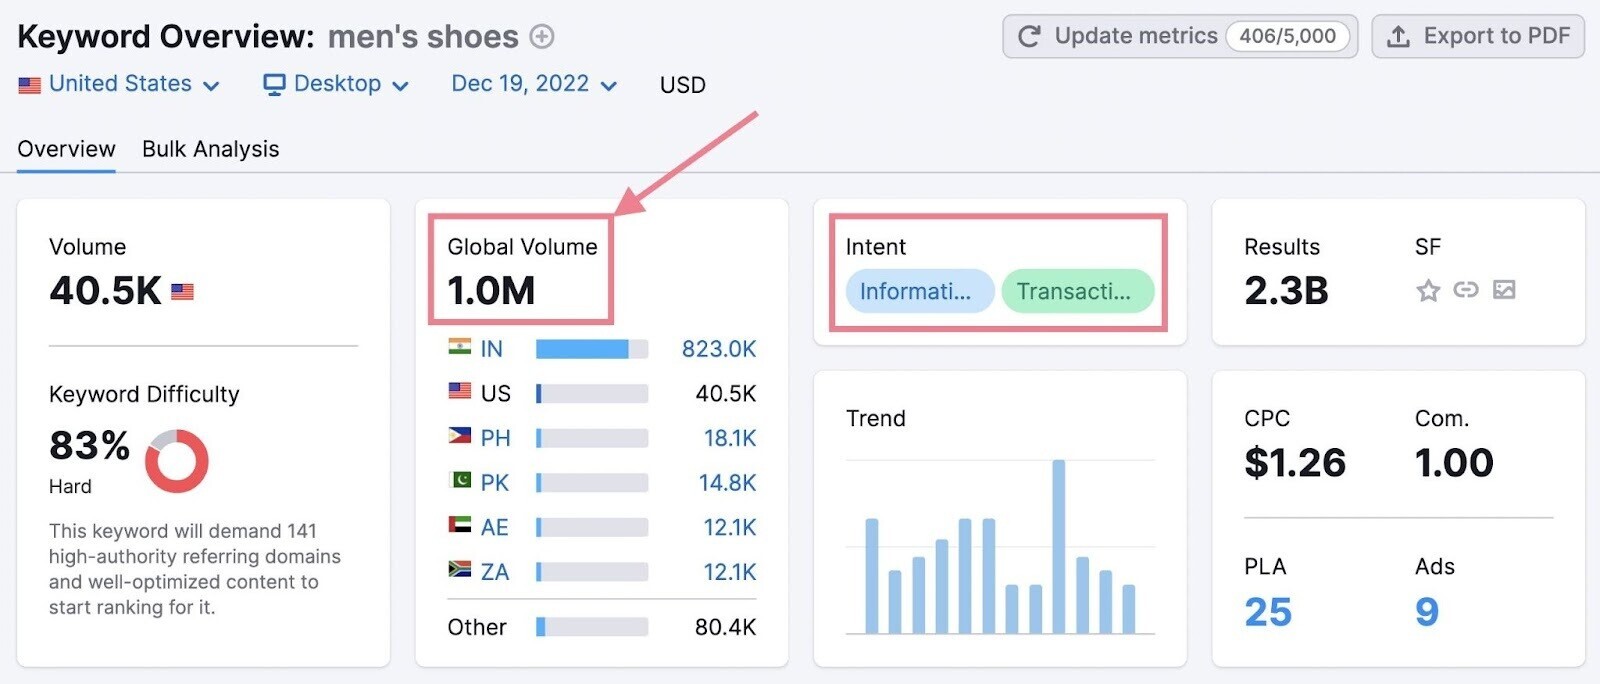 Semrush keyword tool shows the organic and paid search metrics for the keyword “men’s shoes